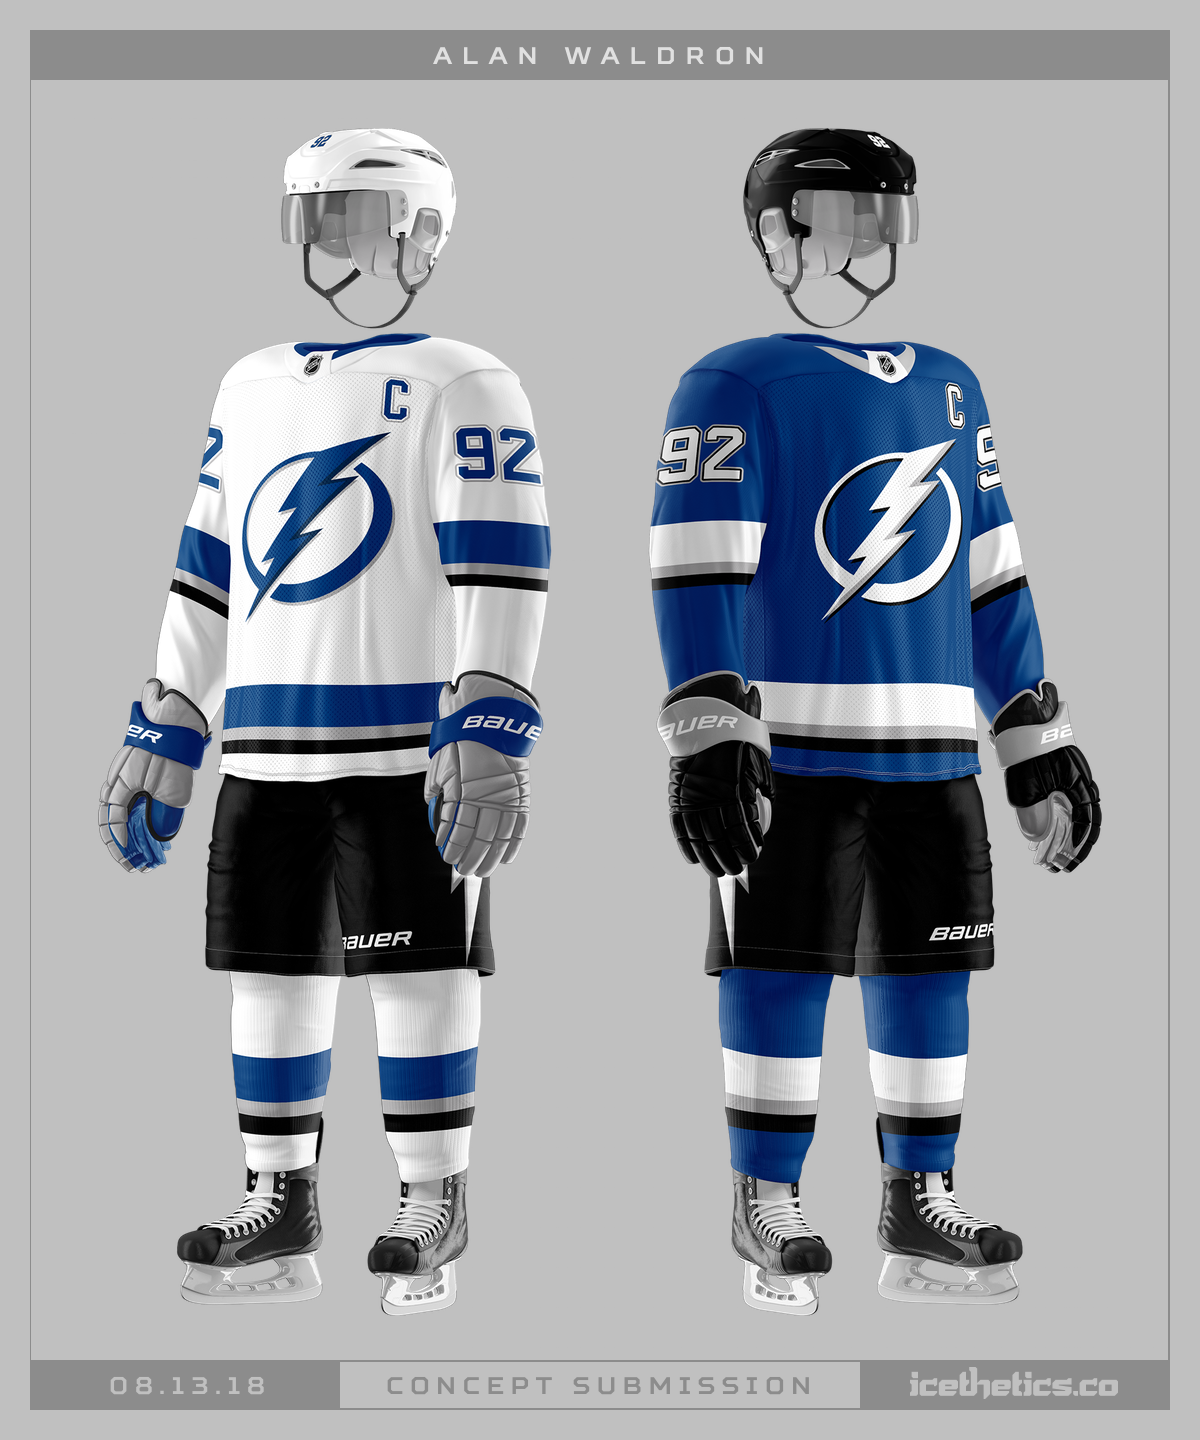 tampa bay lightning jersey concepts